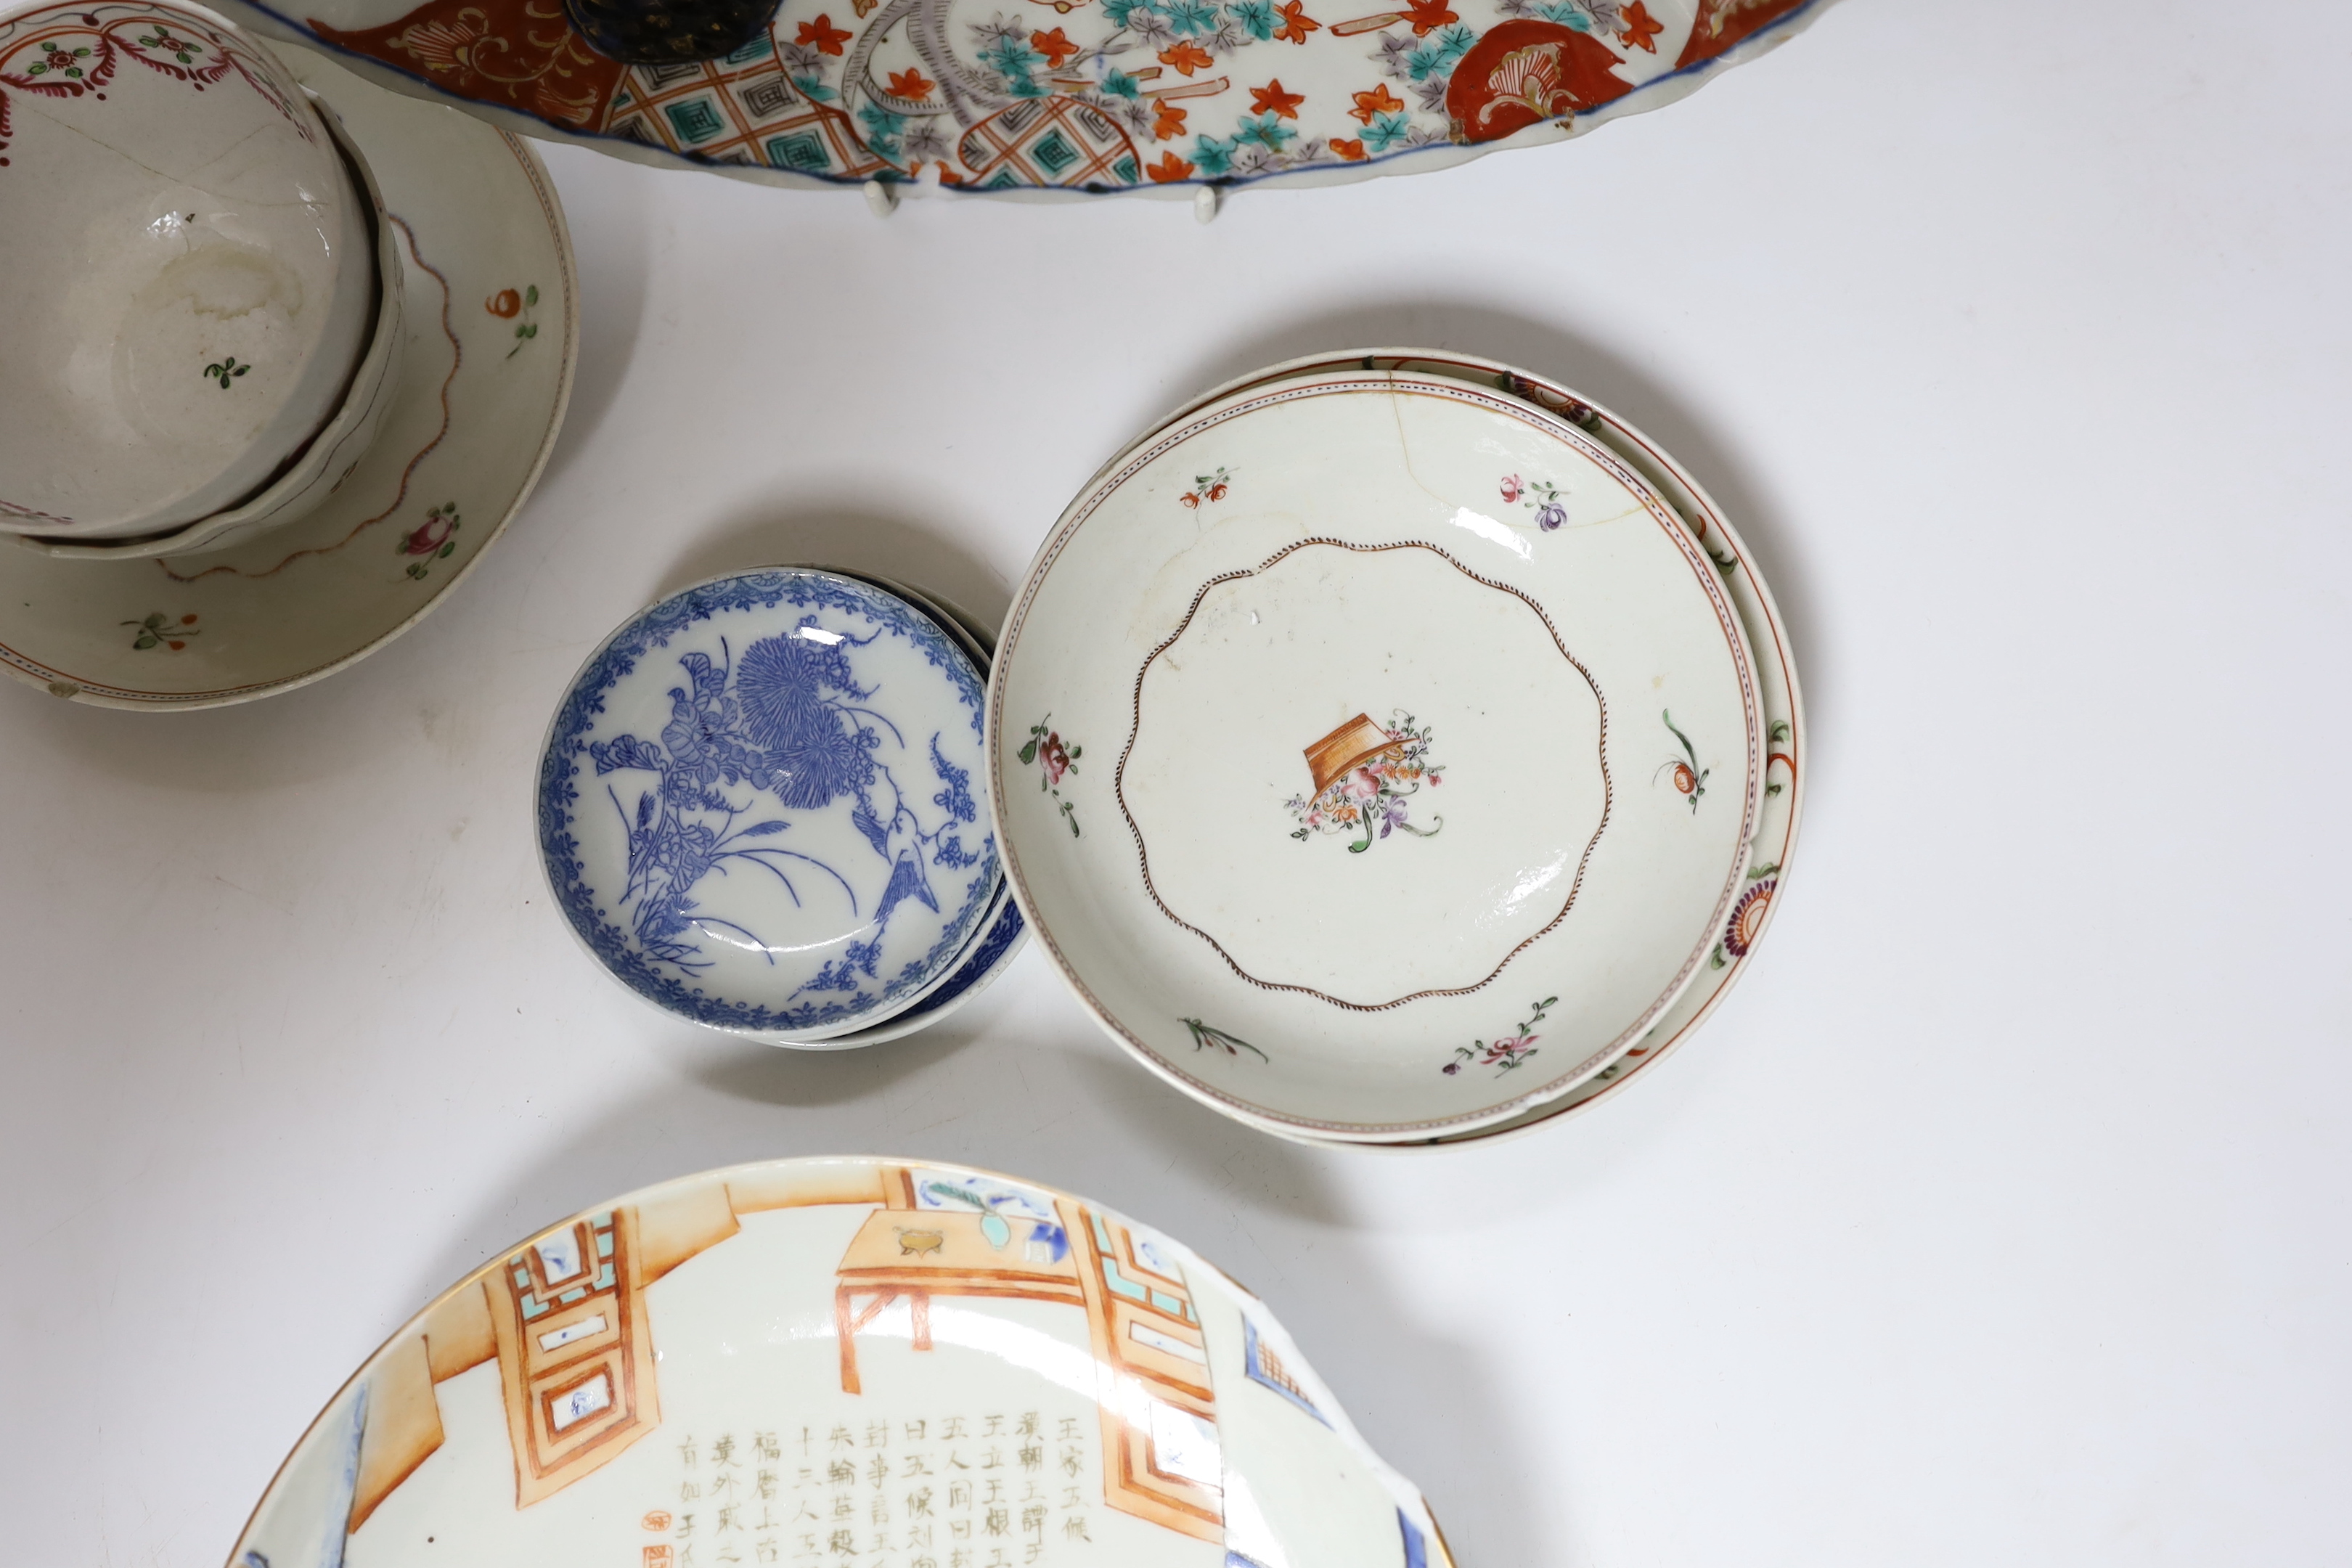 Two Chinese tea bowls and saucers two plates etc plates 25cm diameter